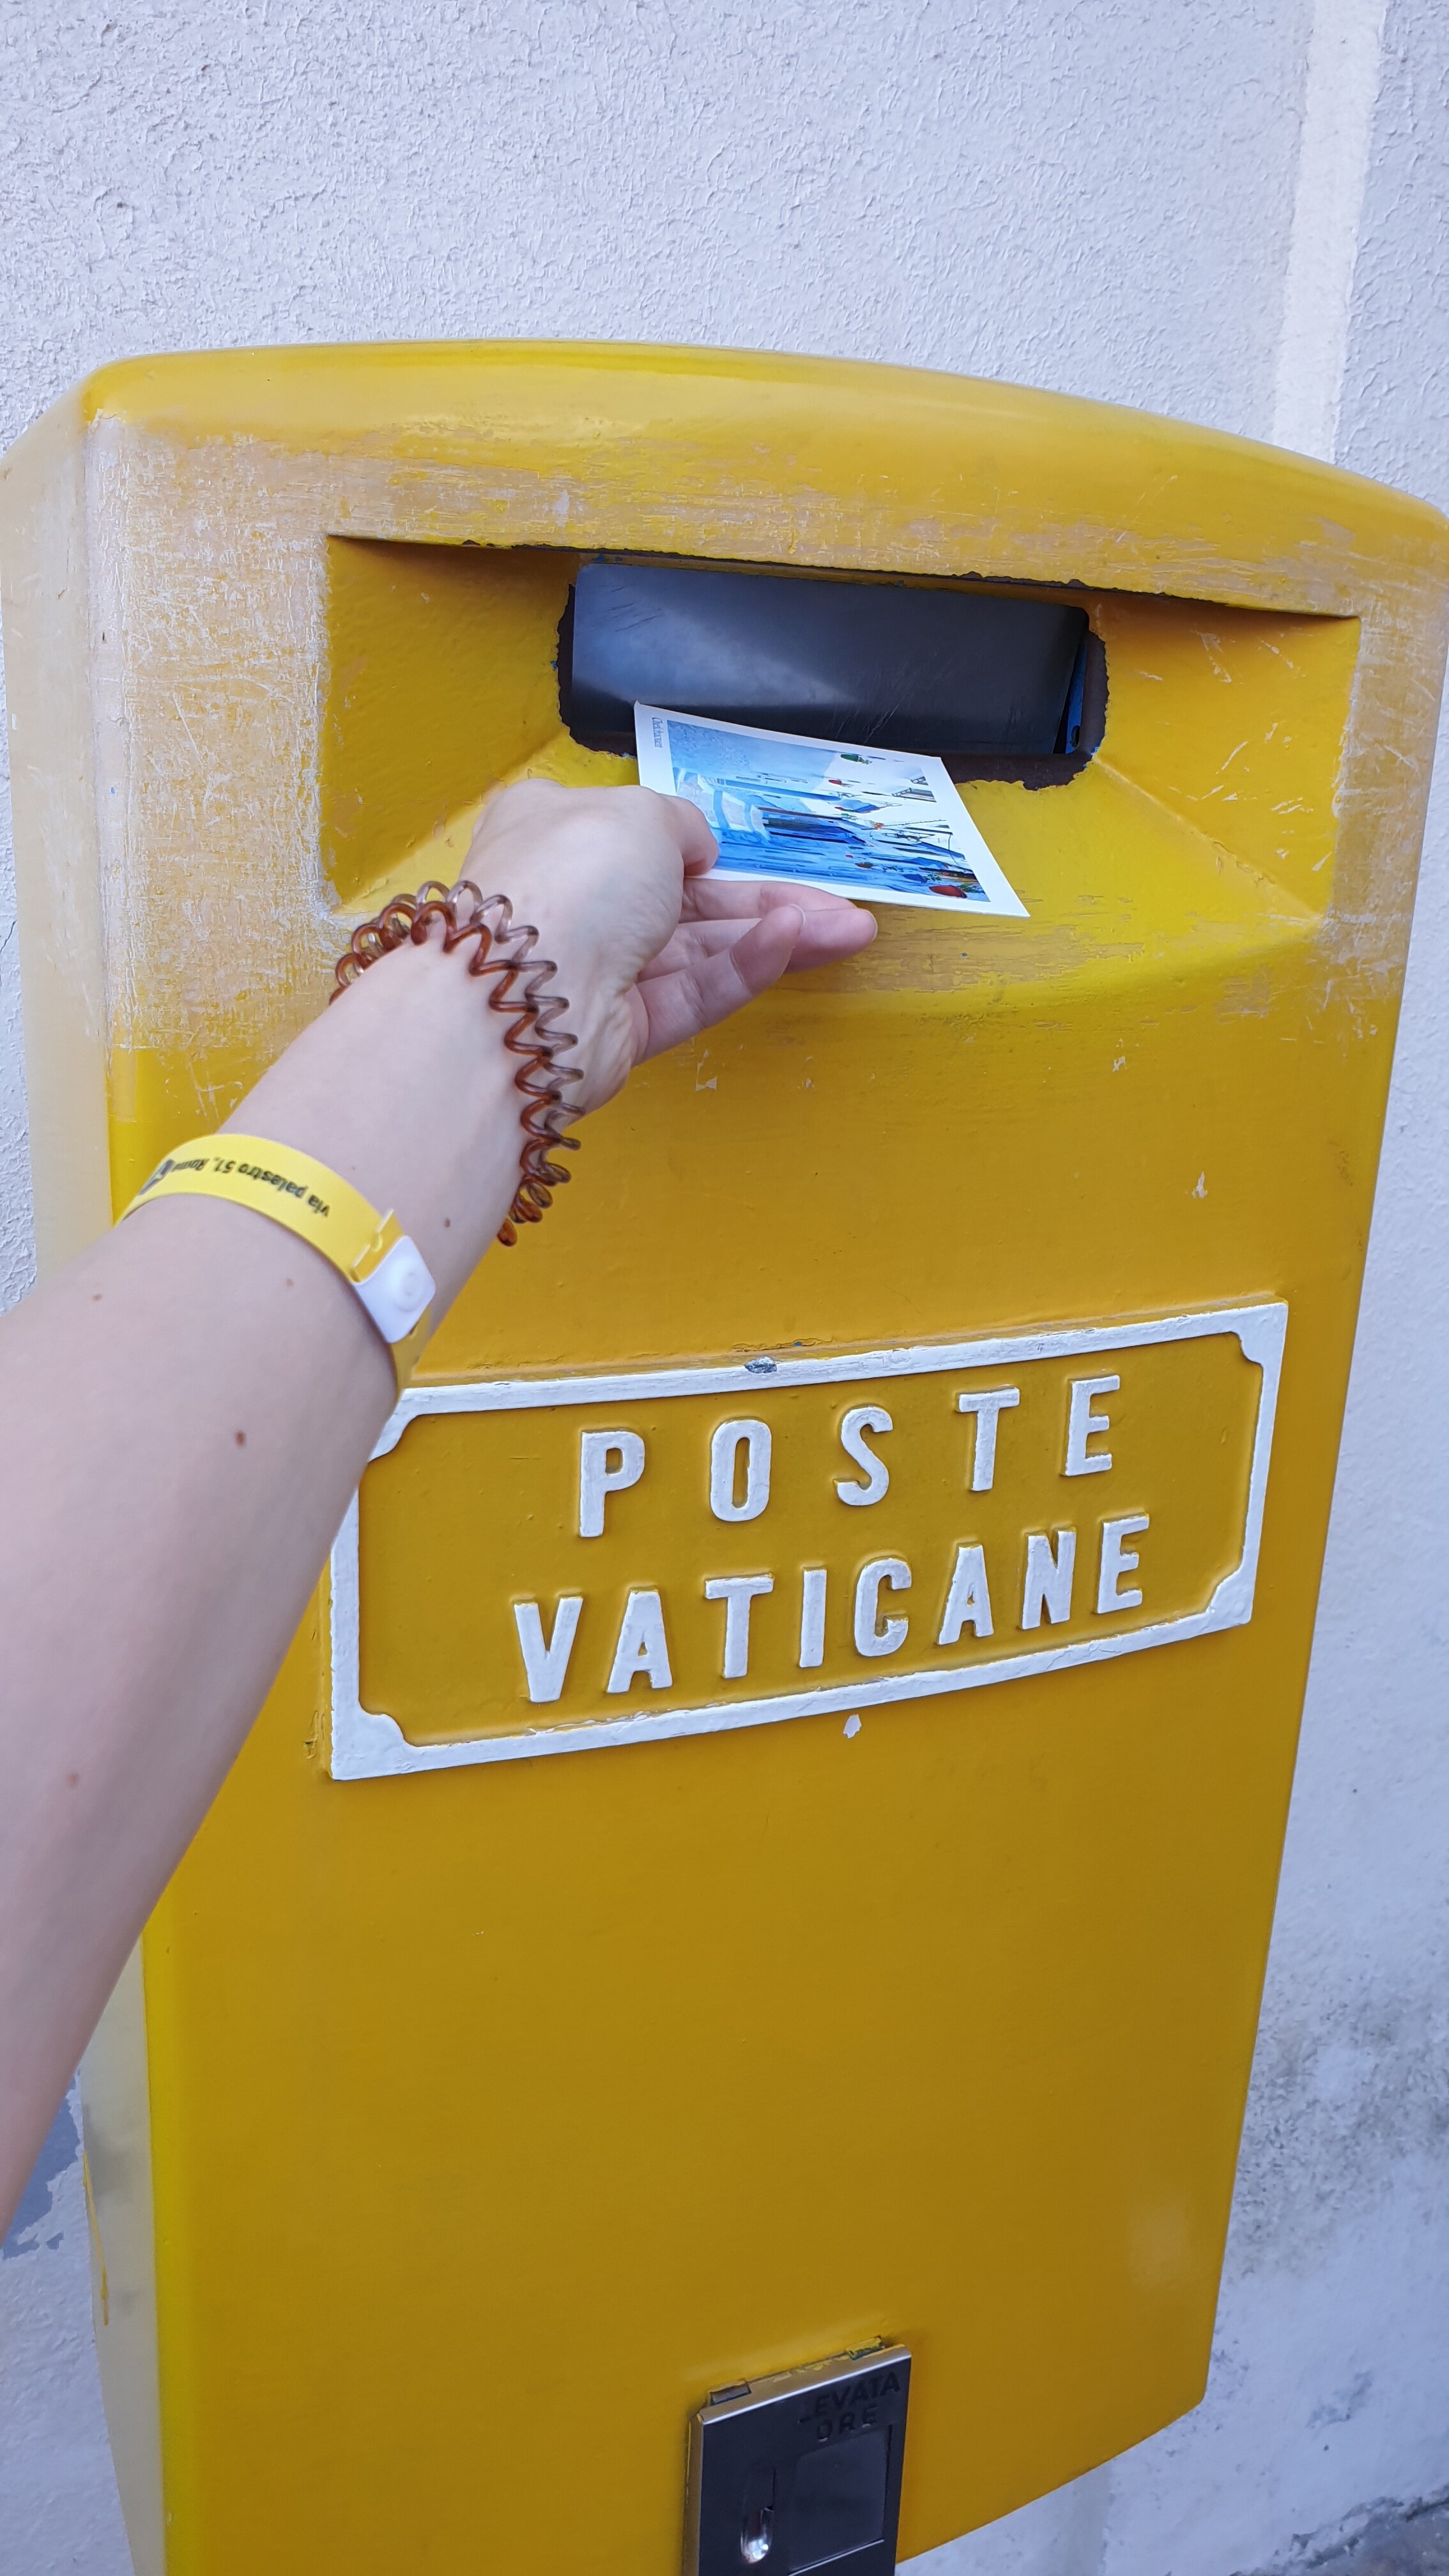 The Vatican City post office